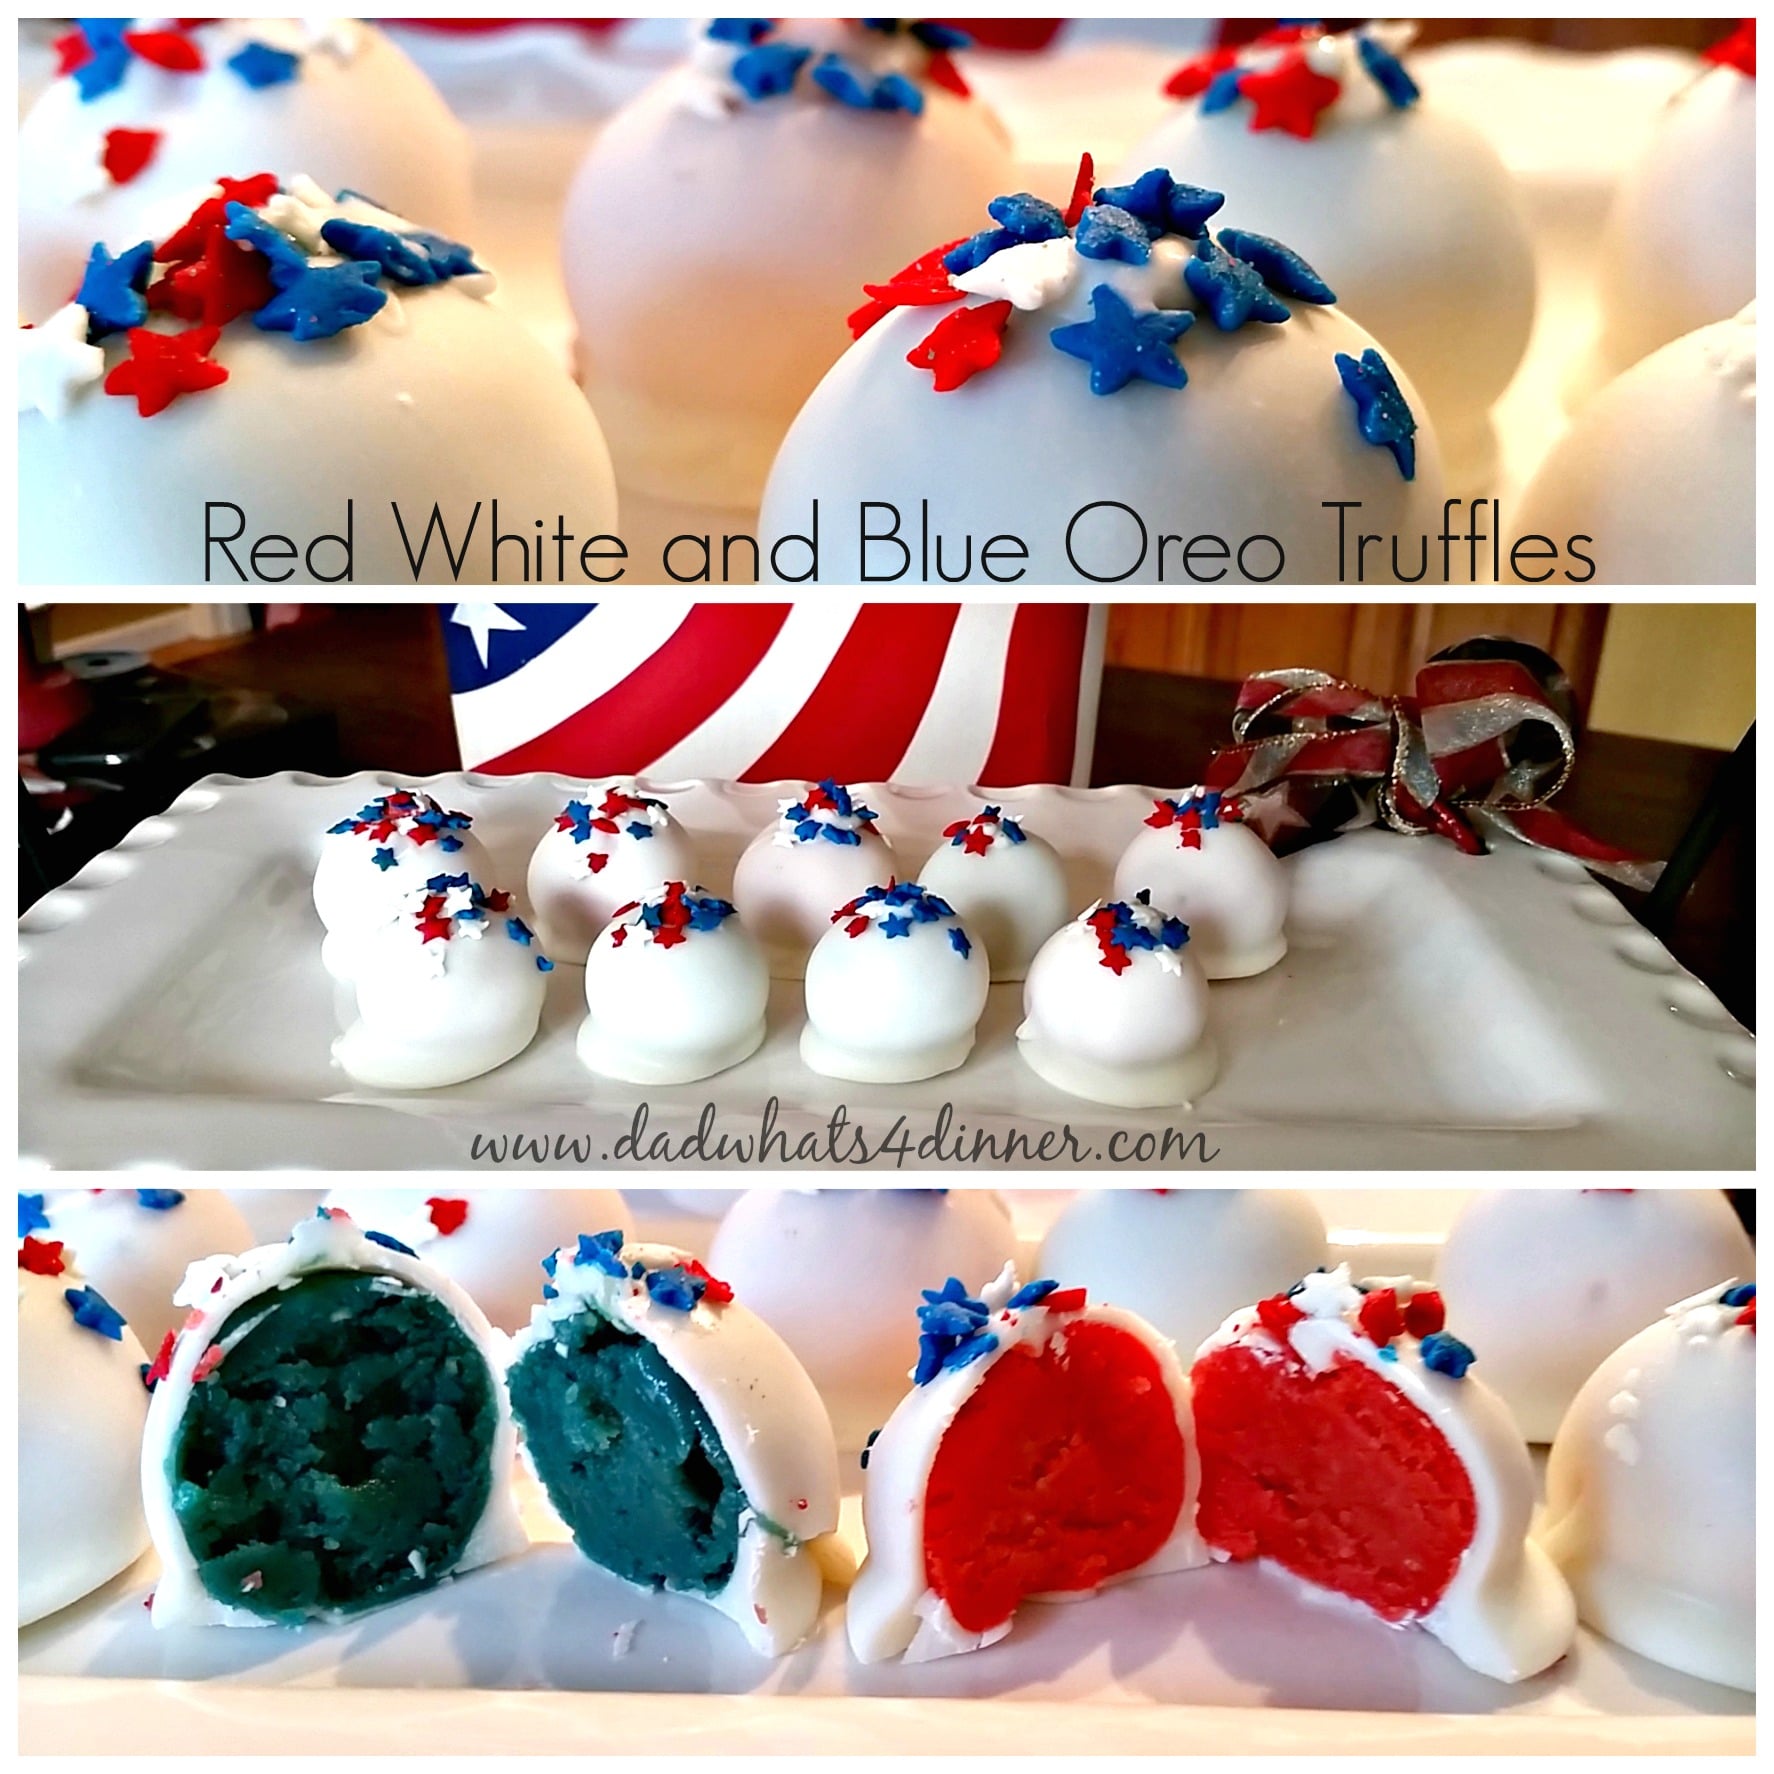 These Red White and Blue Oreo Truffles are a quick, no bake, easy dessert, for the summer cookout season.